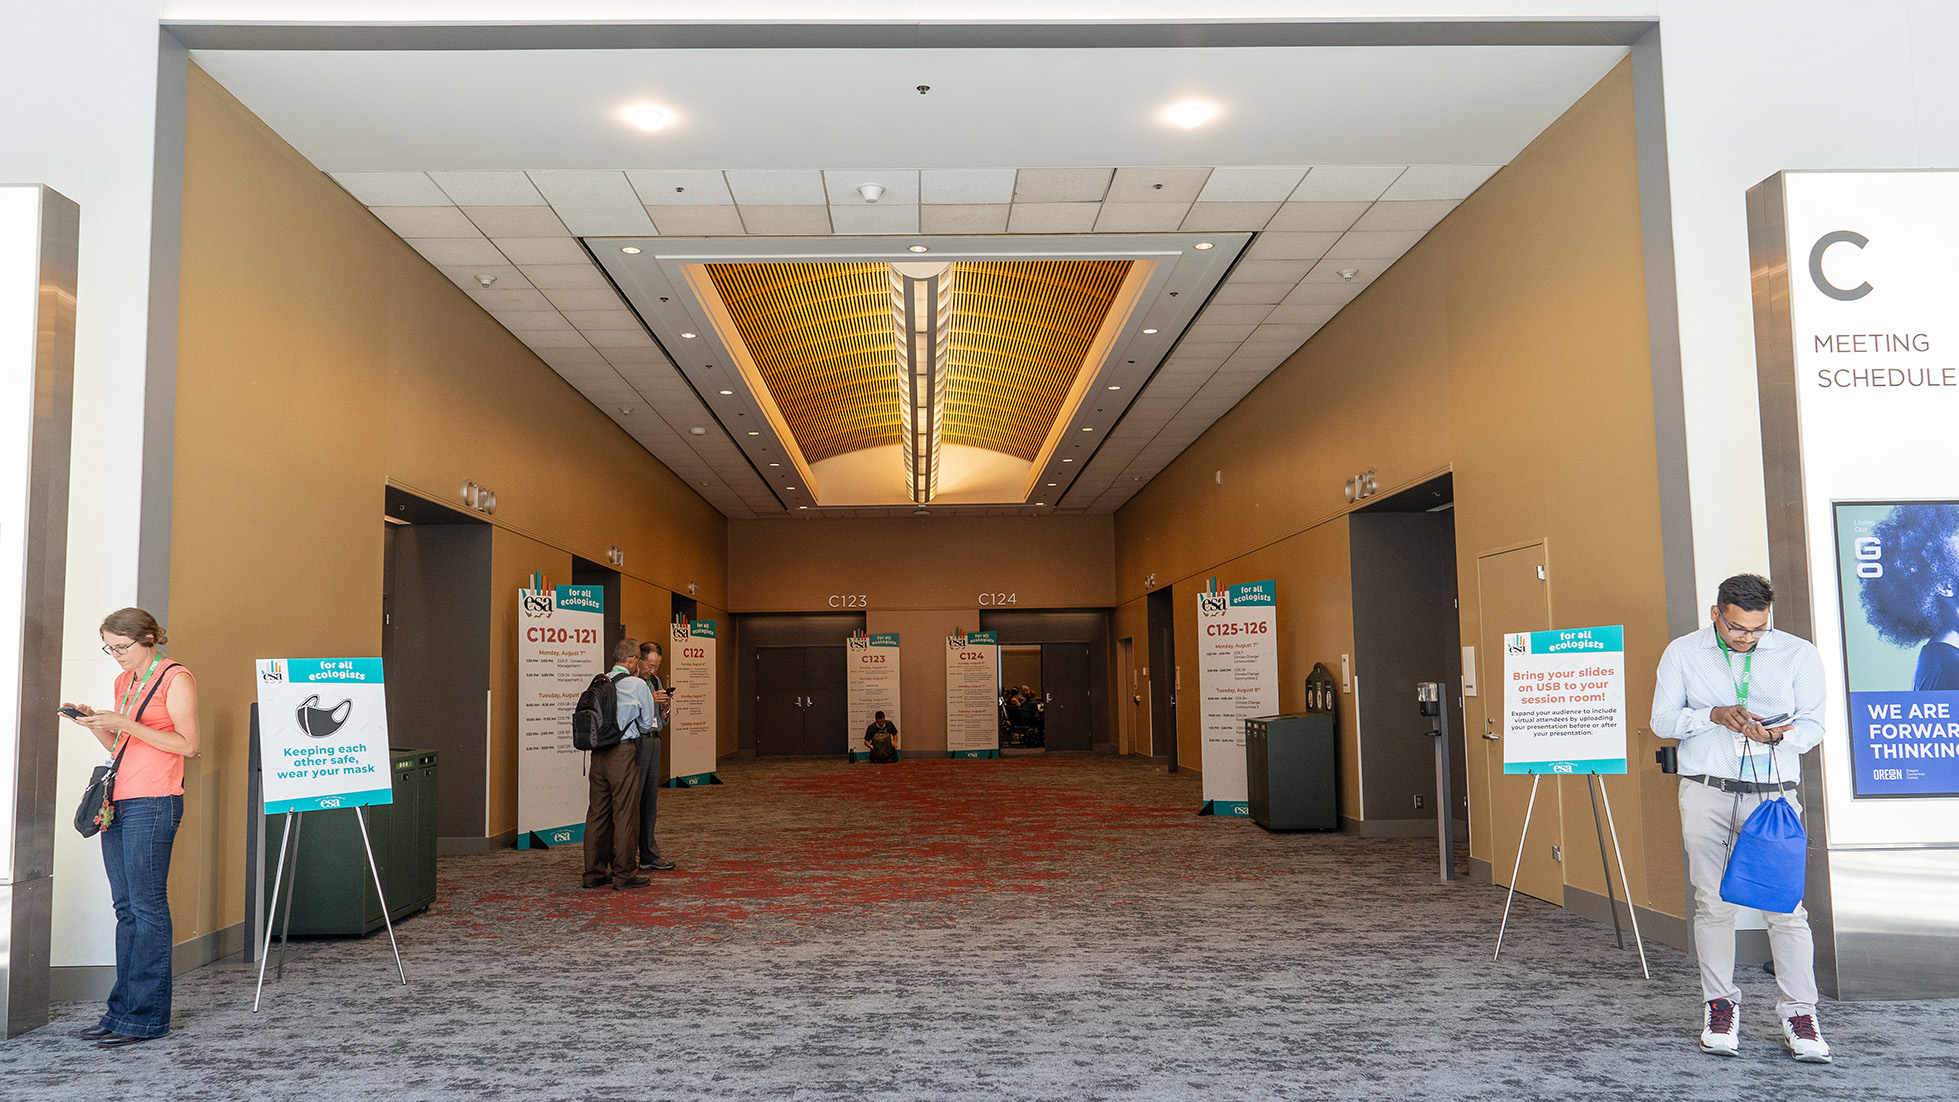 The entrance to session halls from the 2023 annual meeting.